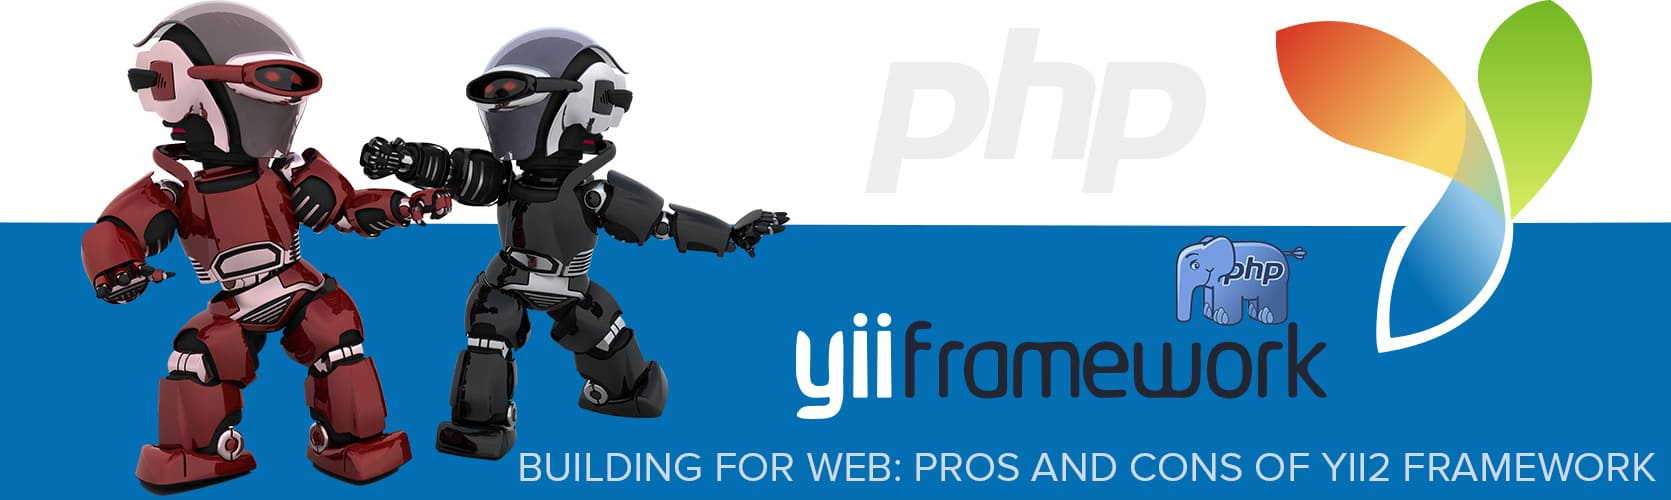 Building Web Solutions: Pros and Cons of Yii2 Framework 